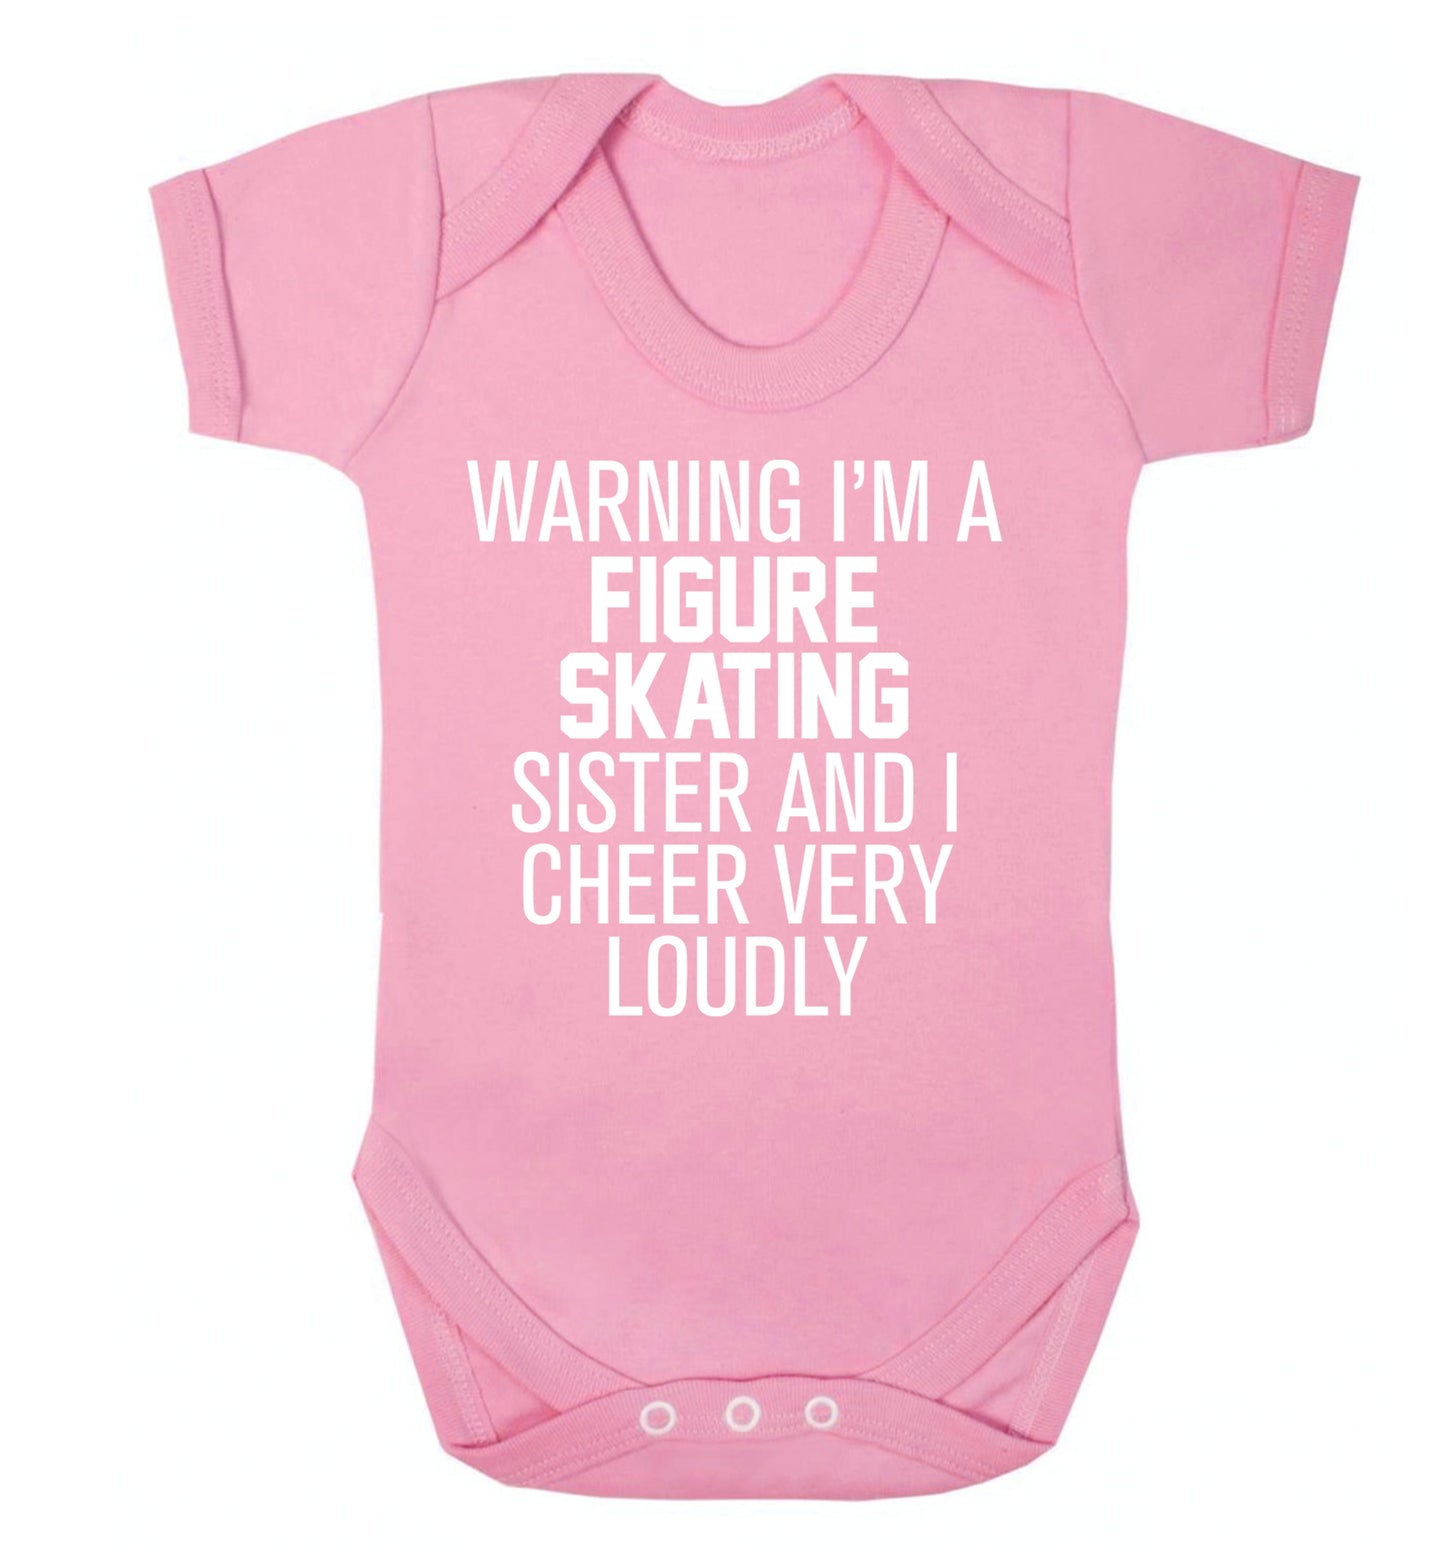 Warning I'm a figure skating sister and I cheer very loudly Baby Vest pale pink 18-24 months